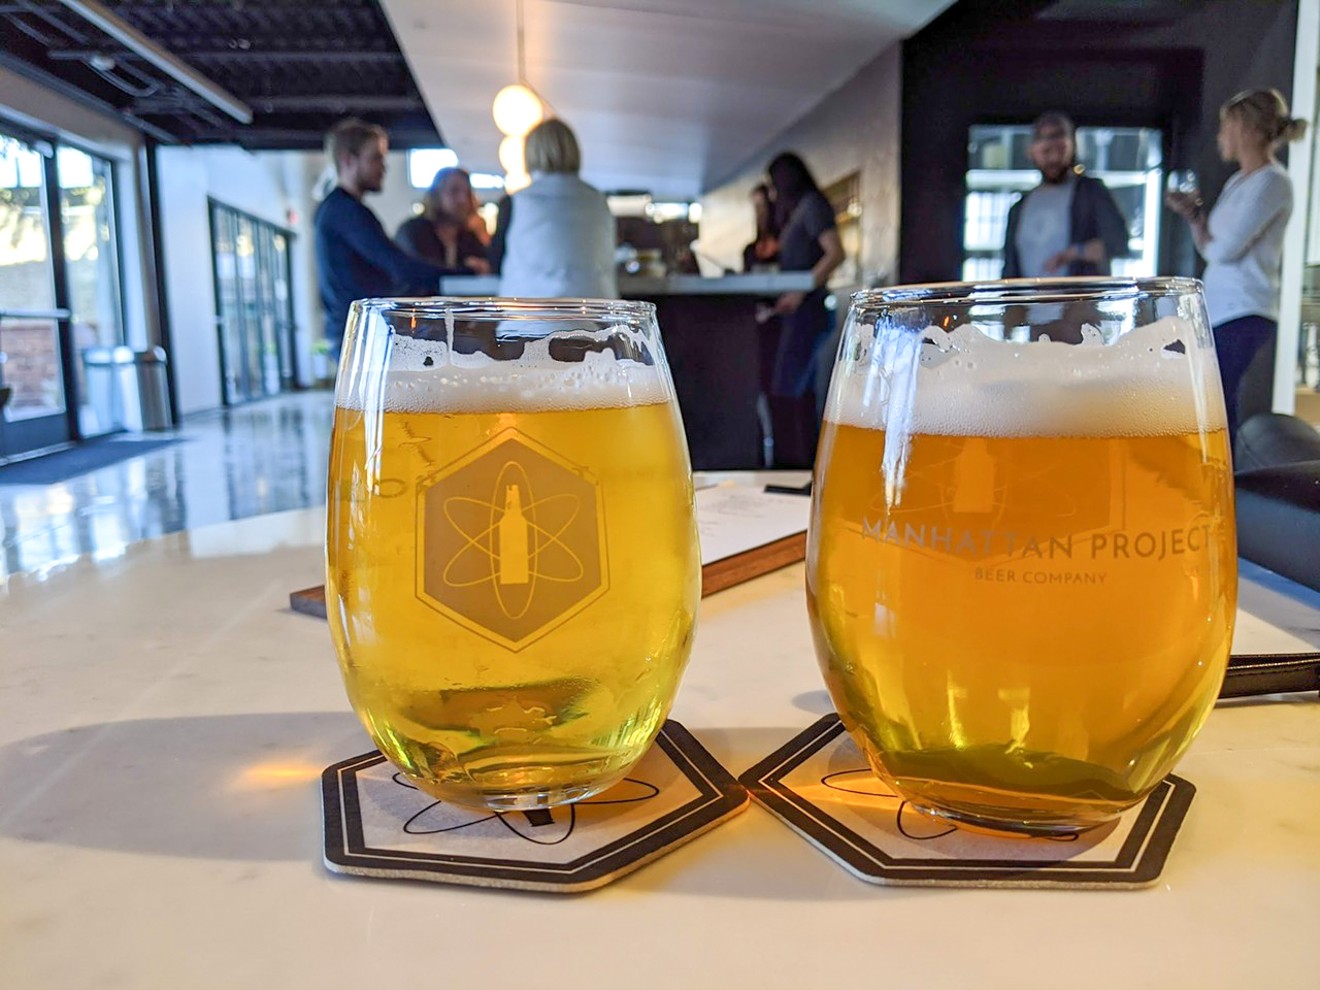 Two beers at Manhattan Project: X-10 session ale and Reaction dry-hopped saison